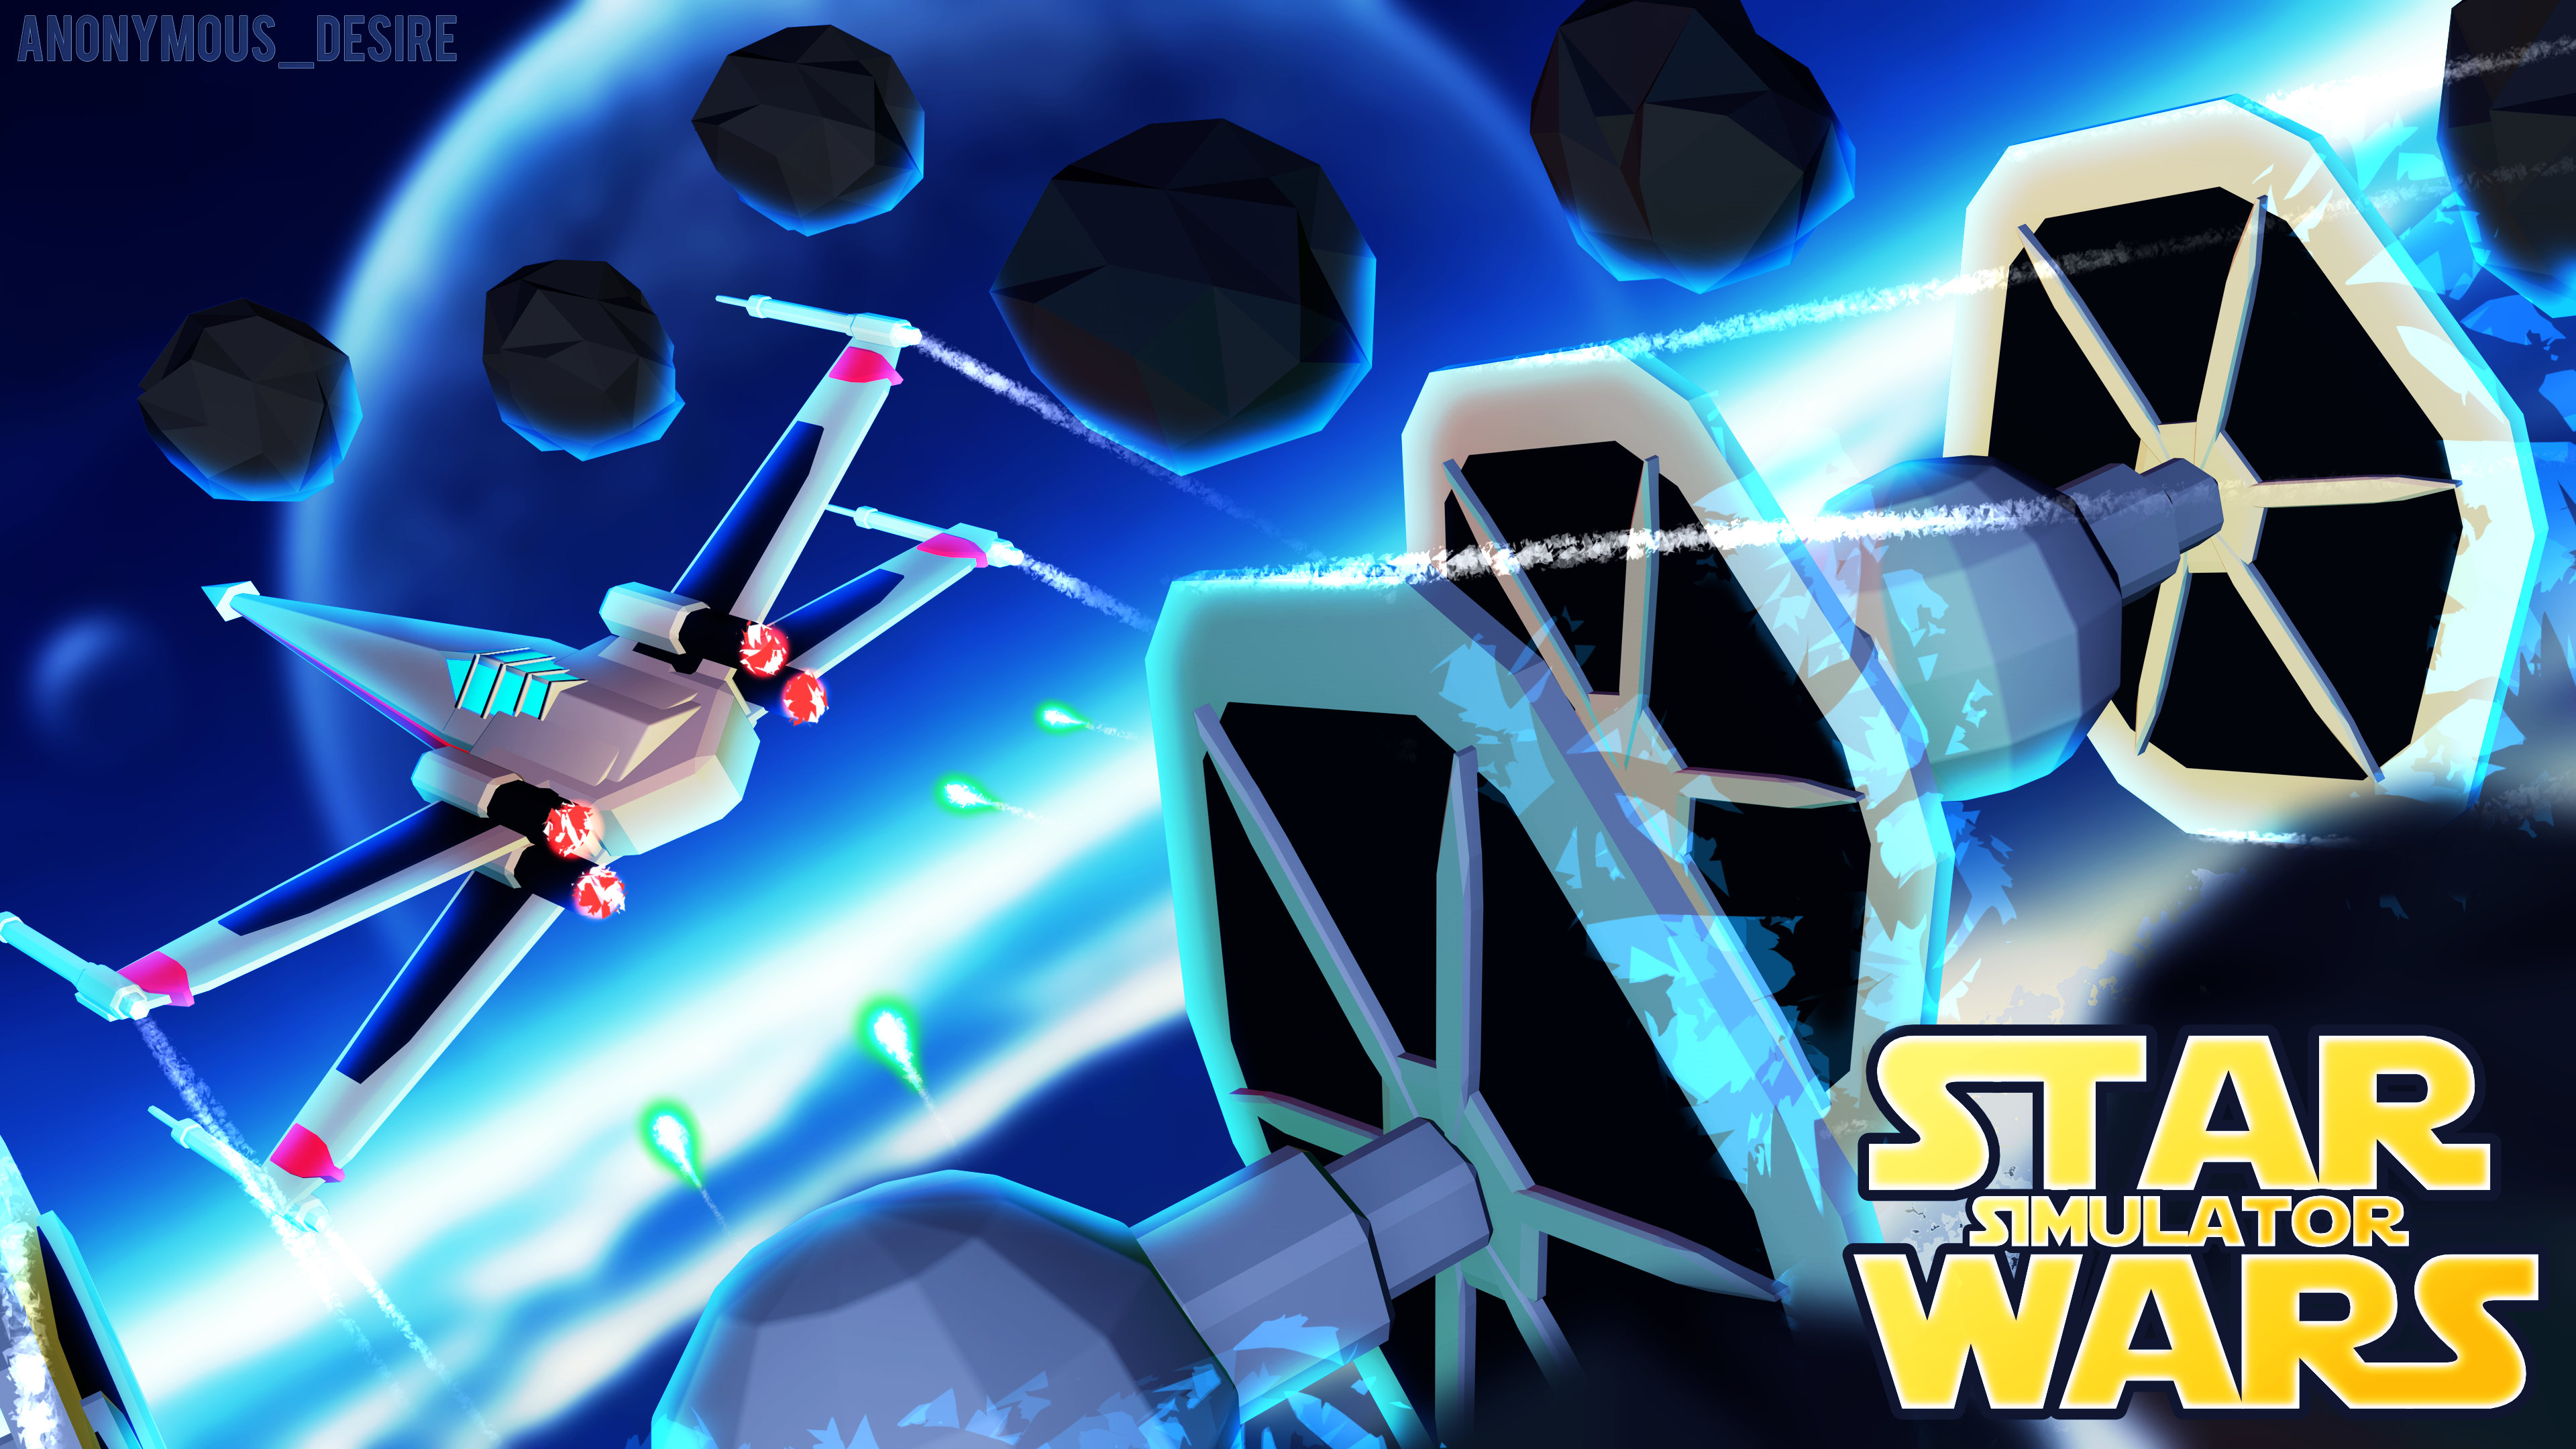 Star Wars Space Battle Roblox By Anonymousdesirerblx On Deviantart - star wars space battle roblox